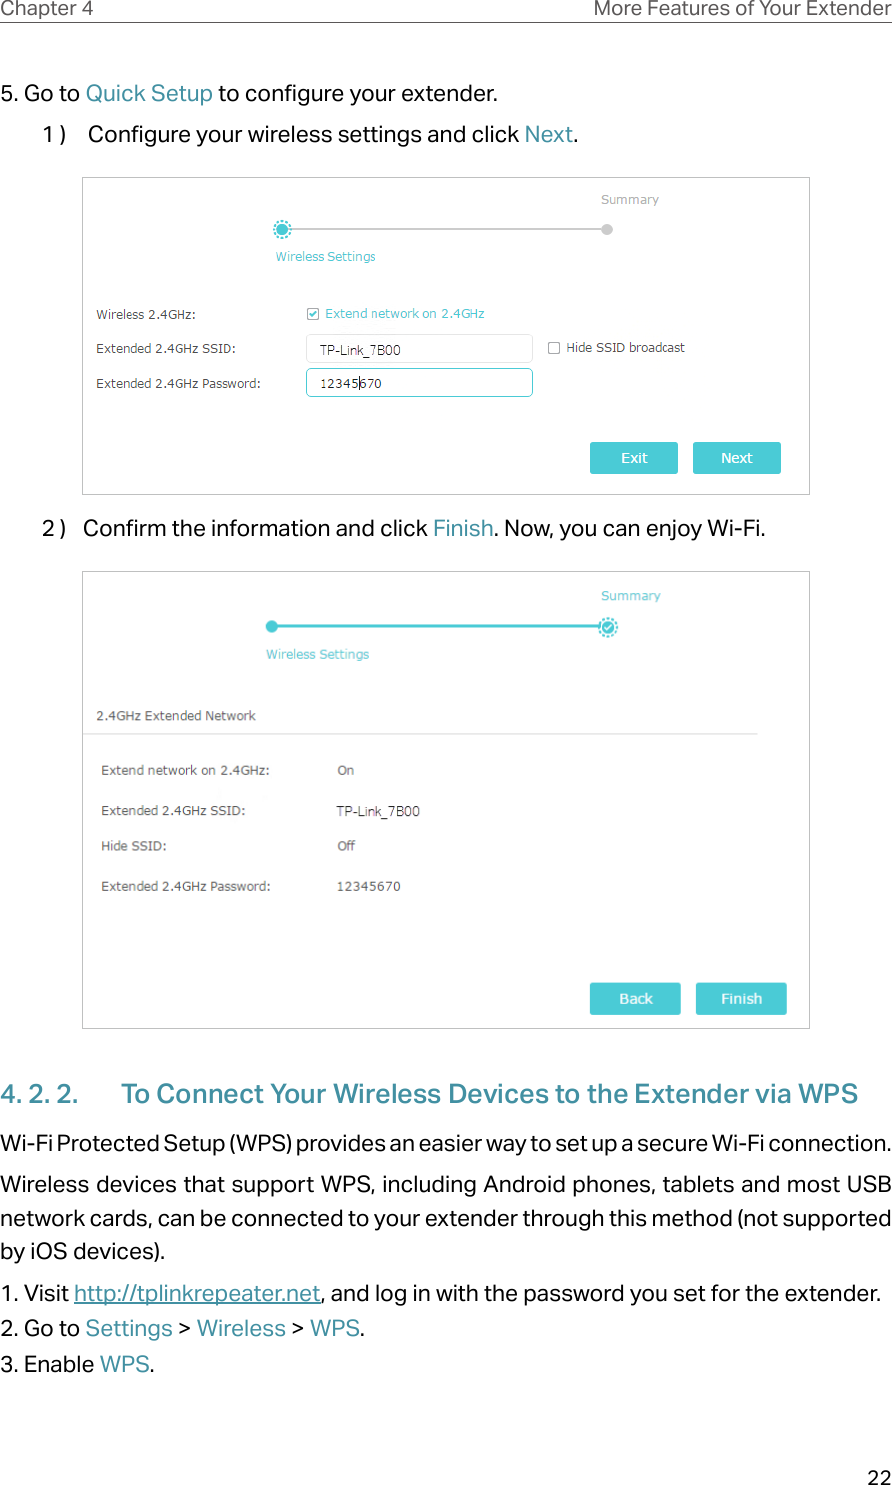 22Chapter 4 More Features of Your Extender5. Go to Quick Setup to configure your extender.1 )   Configure your wireless settings and click Next.  2 )  Confirm the information and click Finish. Now, you can enjoy Wi-Fi.4. 2. 2.  To Connect Your Wireless Devices to the Extender via WPSWi-Fi Protected Setup (WPS) provides an easier way to set up a secure Wi-Fi connection.Wireless devices that support WPS, including Android phones, tablets and most USB network cards, can be connected to your extender through this method (not supported by iOS devices).1. Visit http://tplinkrepeater.net, and log in with the password you set for the extender.2. Go to Settings &gt; Wireless &gt; WPS. 3. Enable WPS.